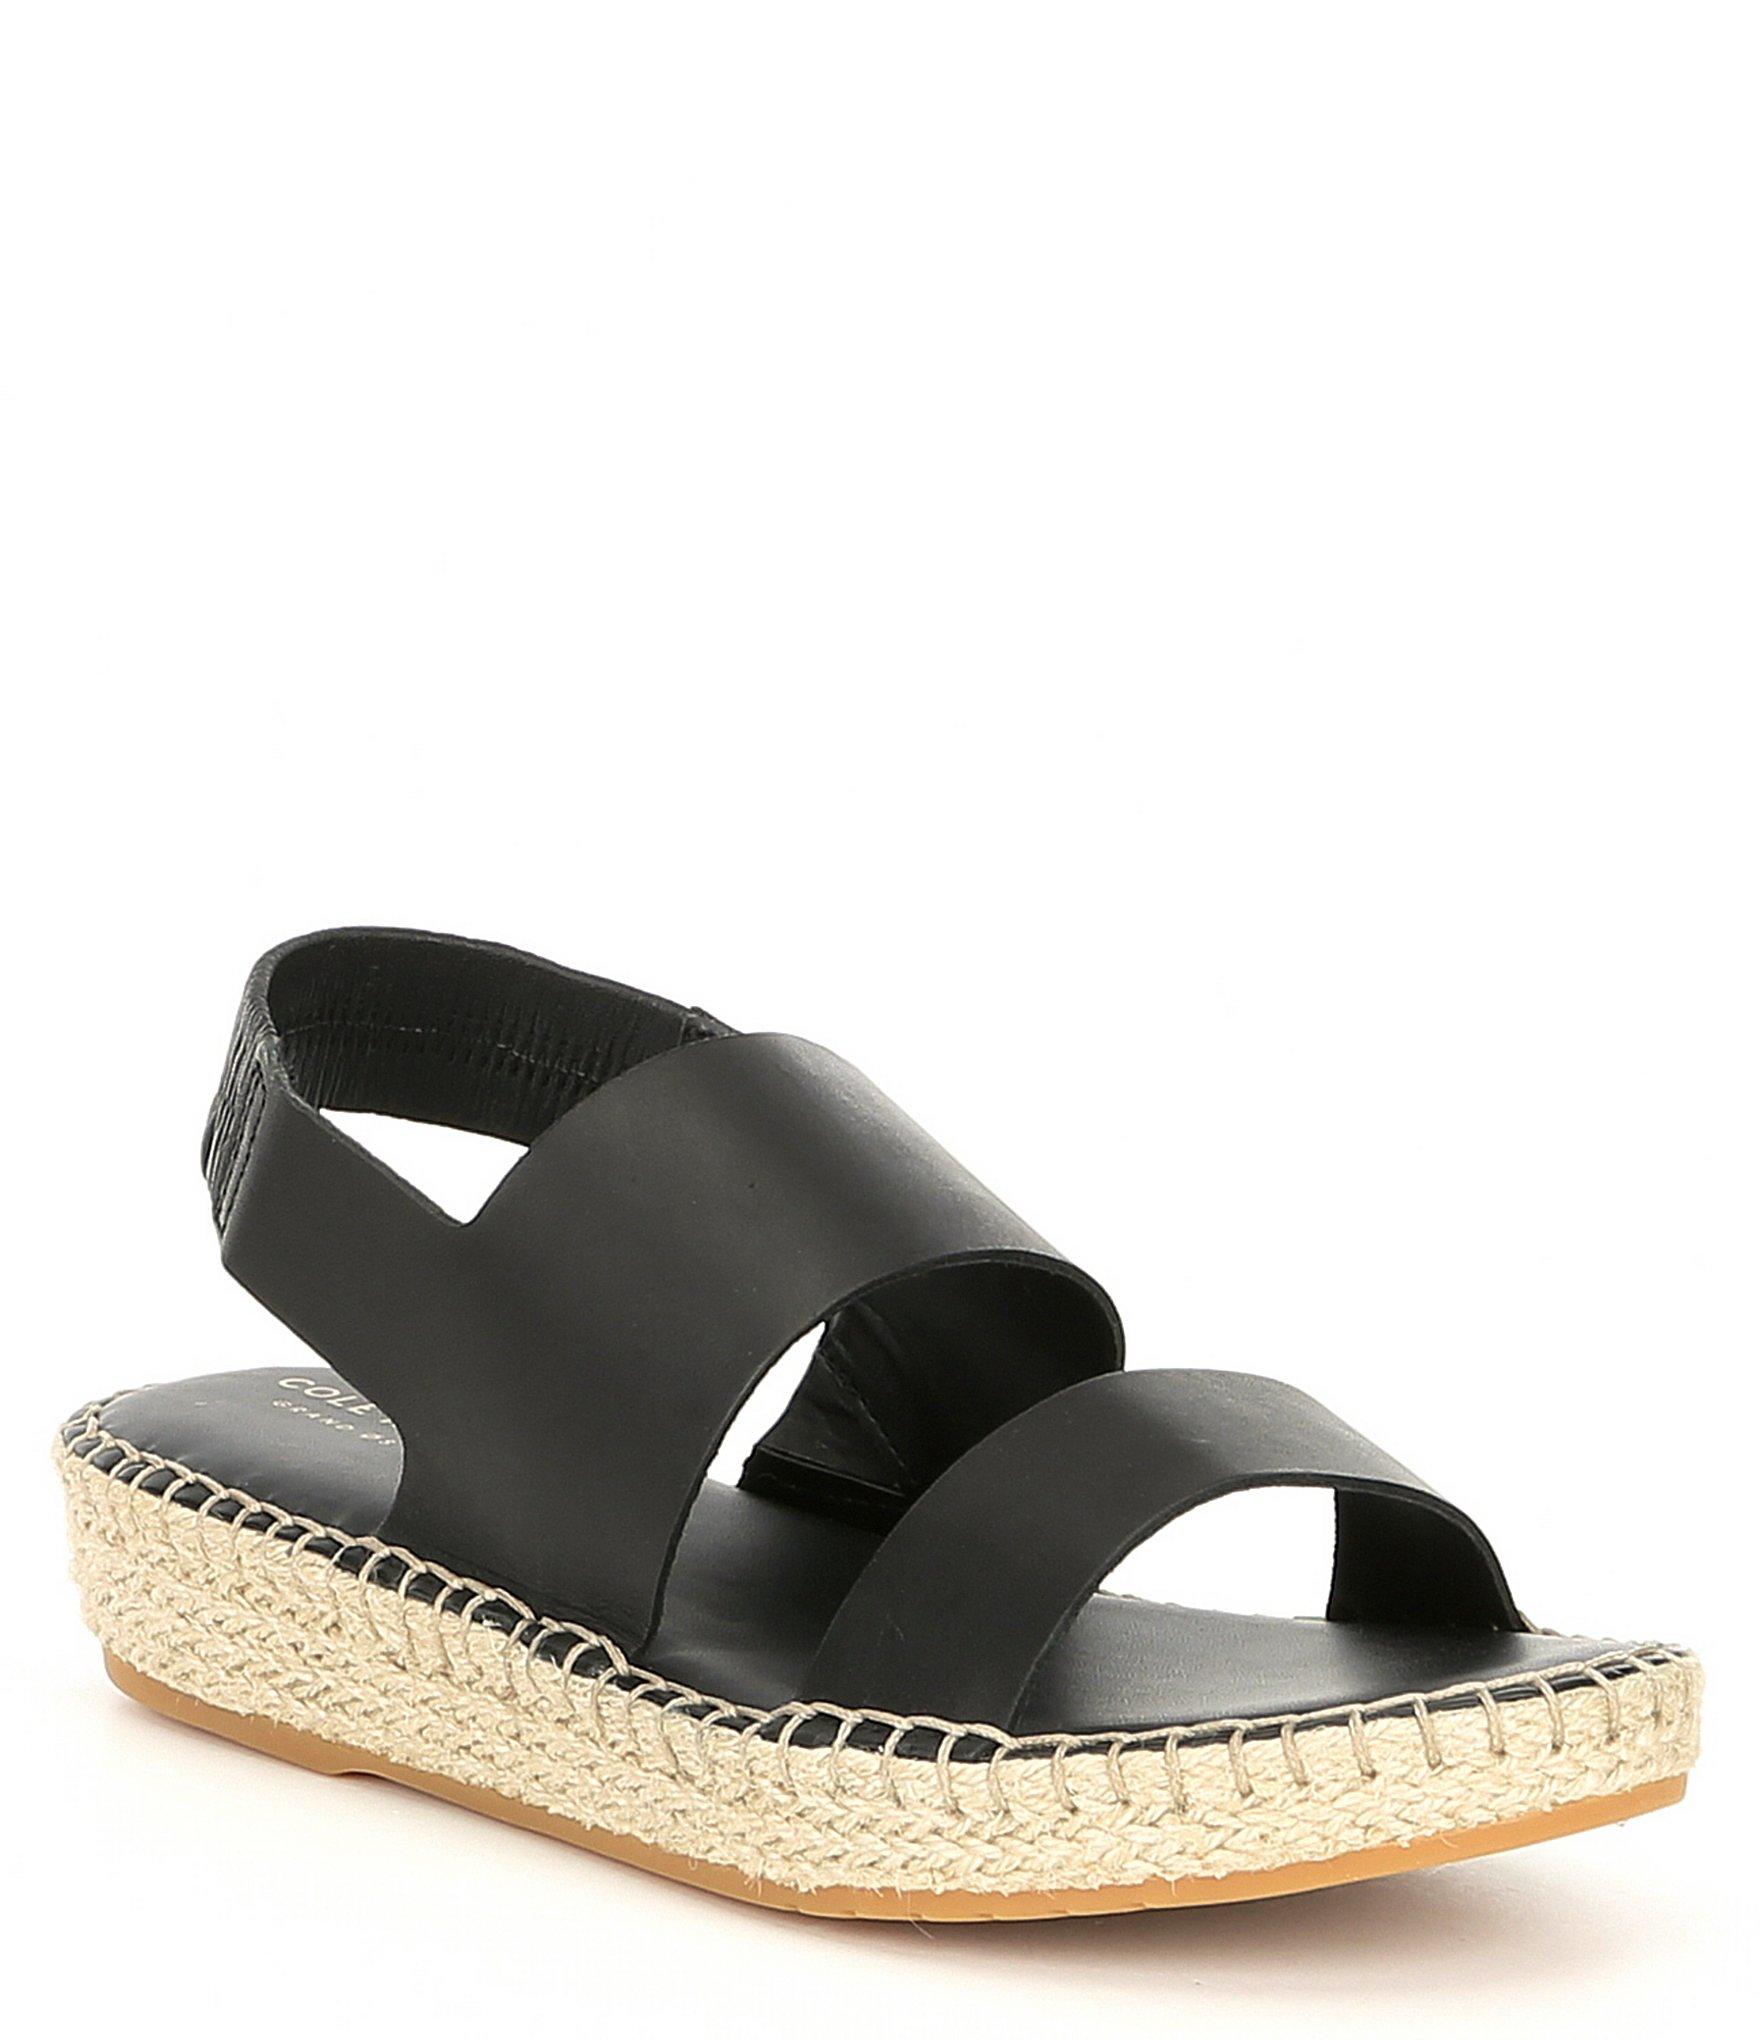 Cole Haan Leather Cloudfeel Espadrille Sandal in Black Leather (Black